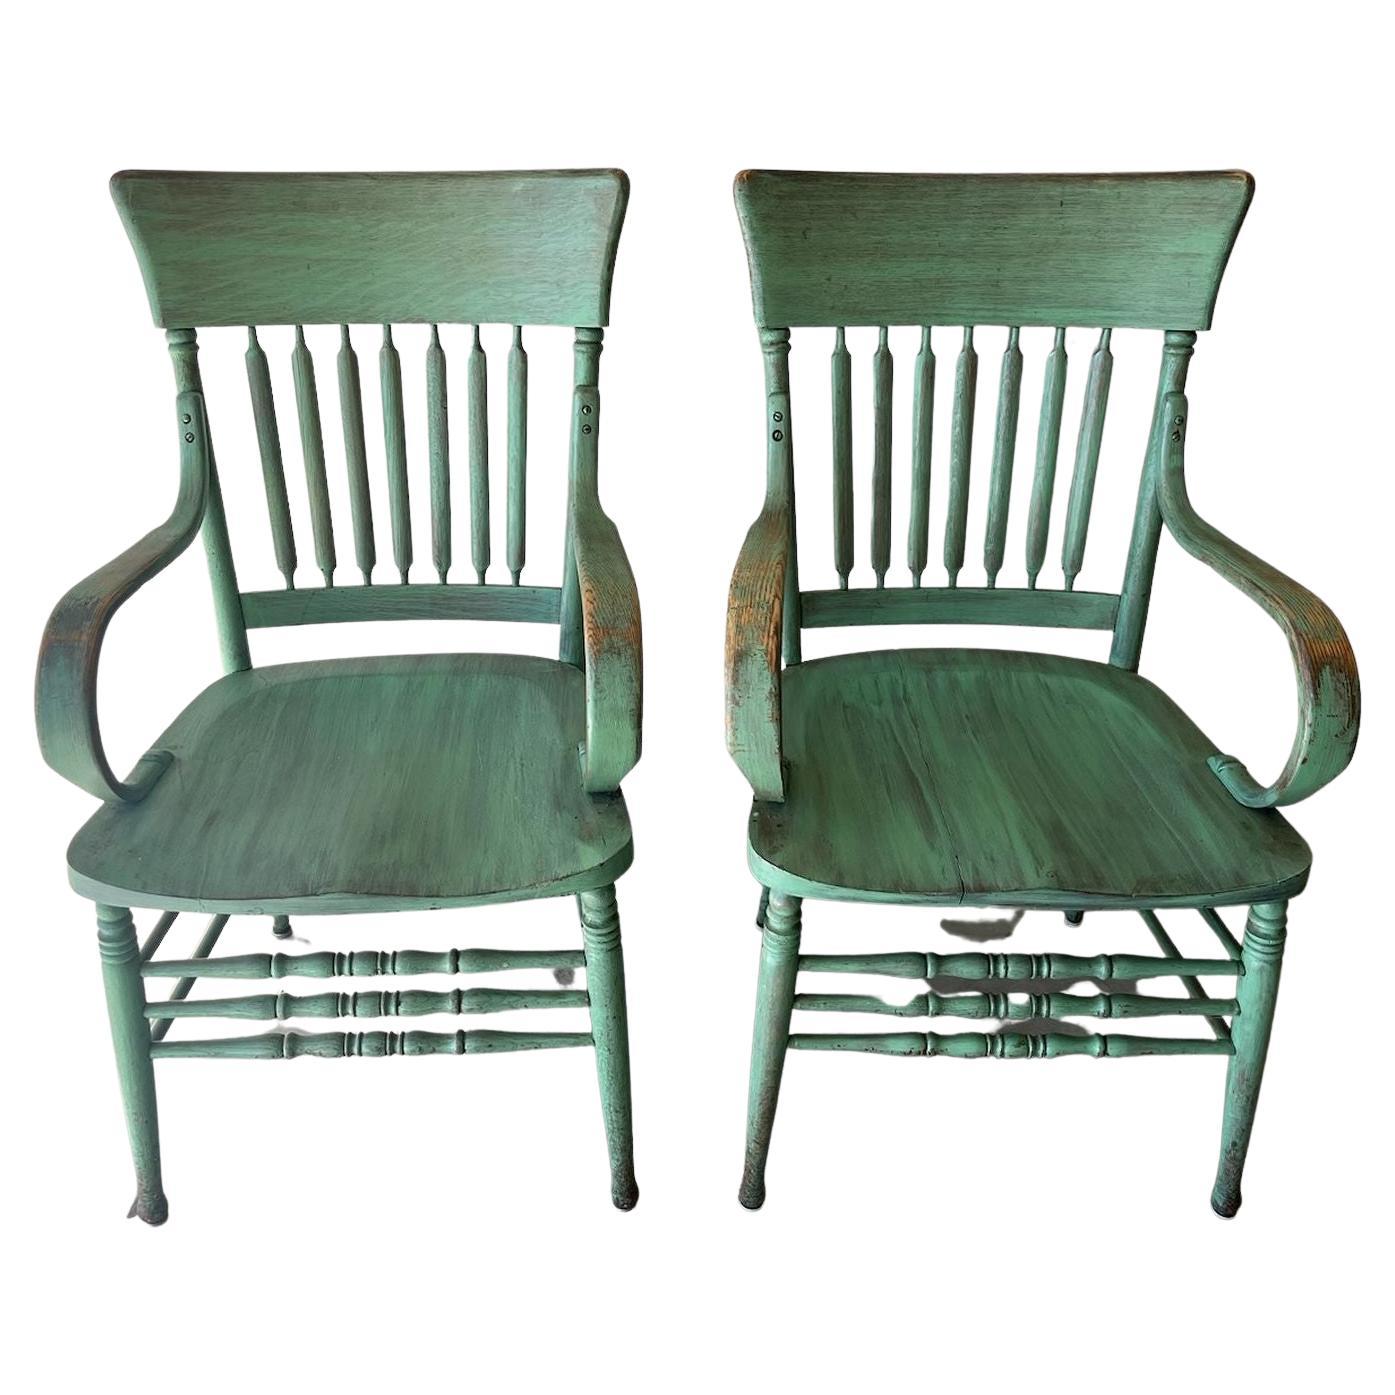 Matching Pair of E. 20thc Original Green Painted Arm Chairs For Sale